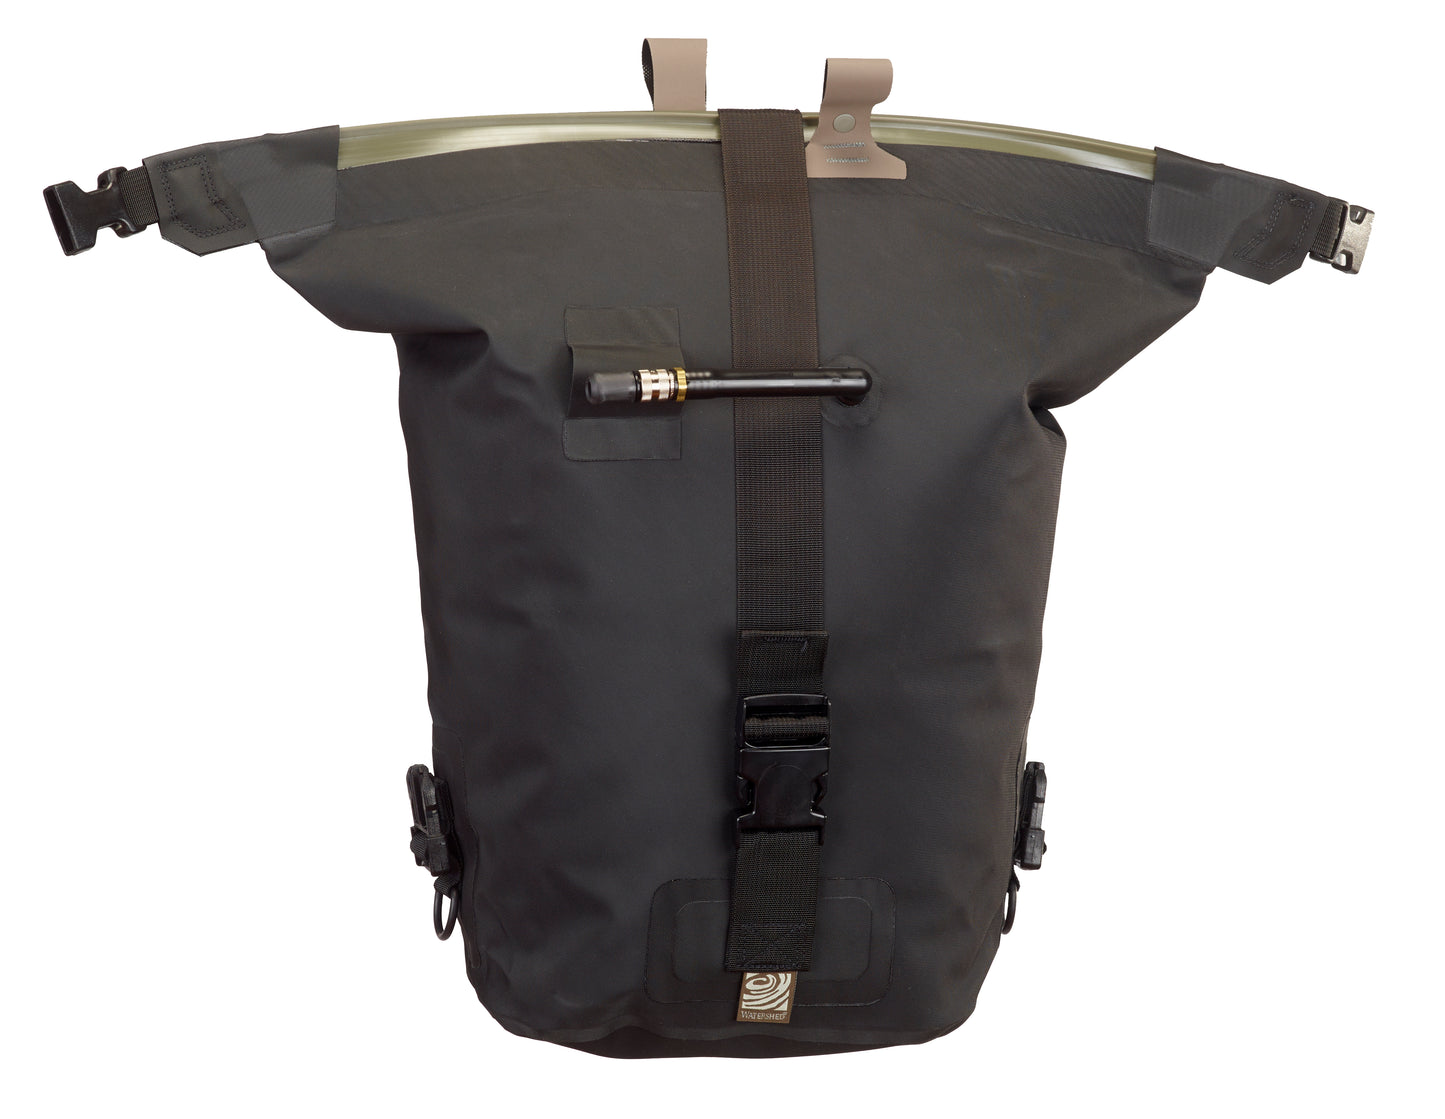 Watershed Small Utility Bag